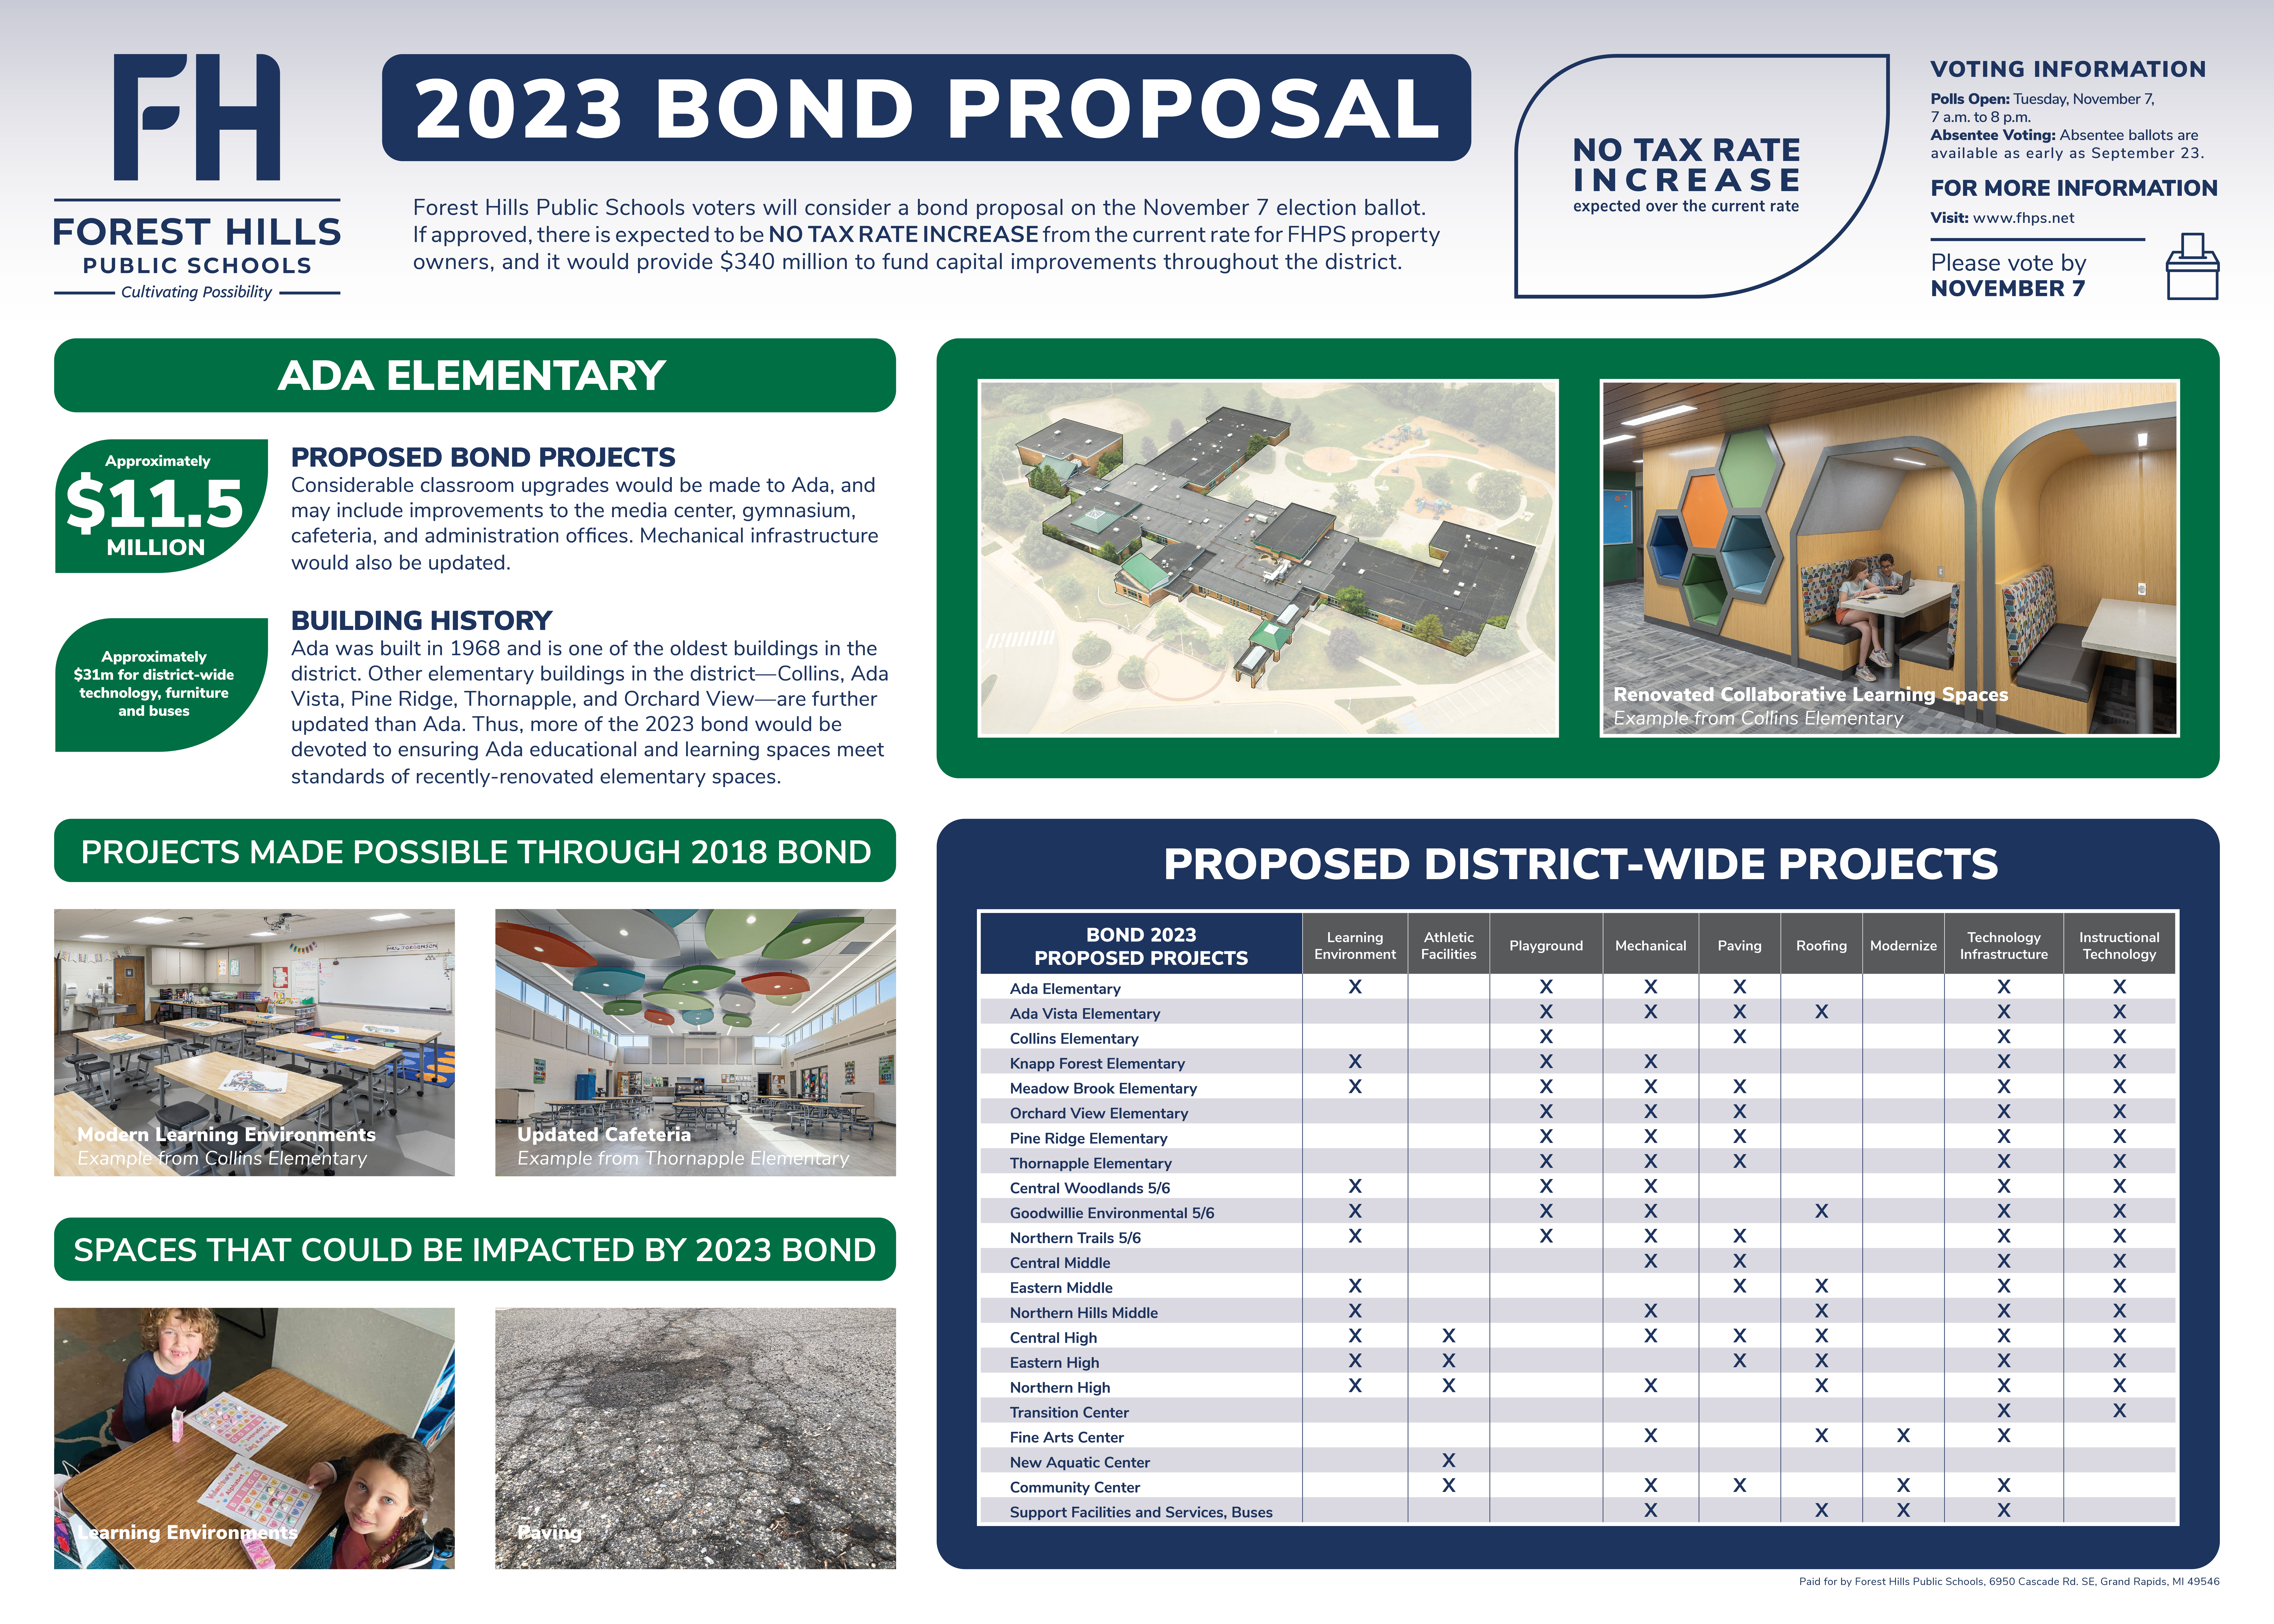 Ada Elementary and pictures of the existing building and bond project pictures from 2018 and spaces that could be impacted by the 2023 bond.